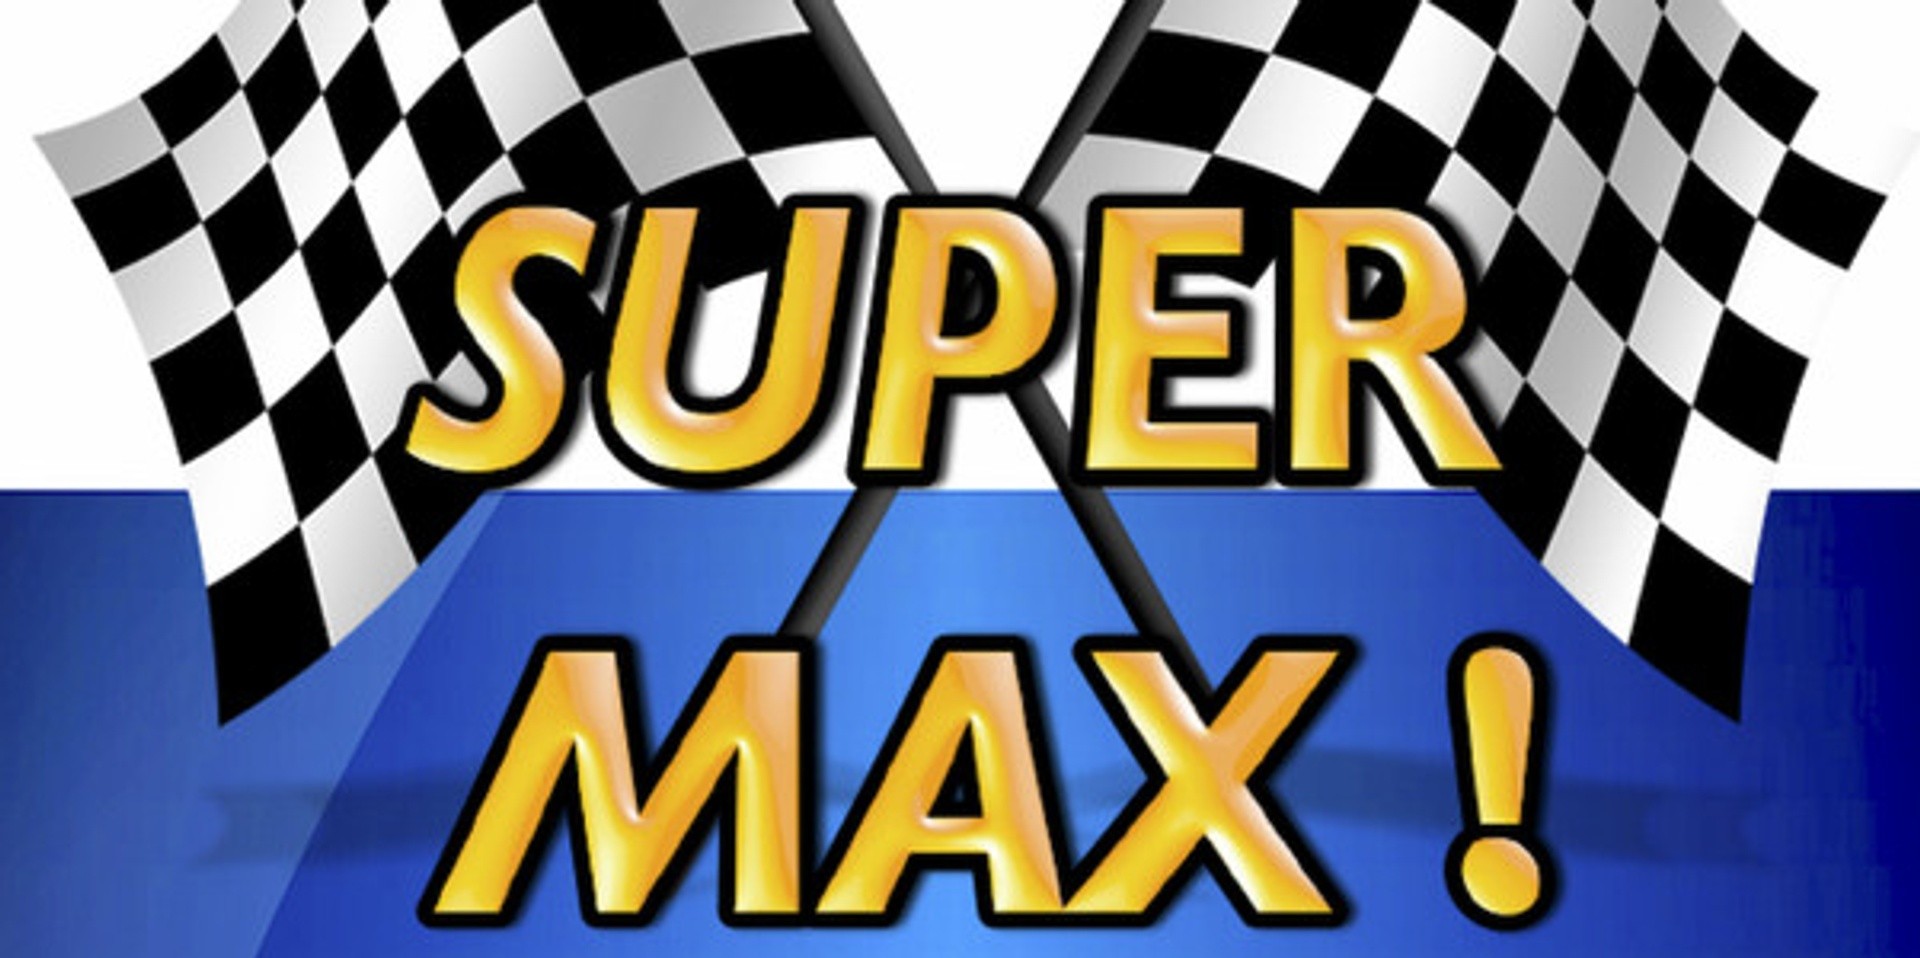 Pitstop Boys' 'Super Max!' takes over Spotify Viral charts after Red Bull's Max Verstappen first F1 championship win